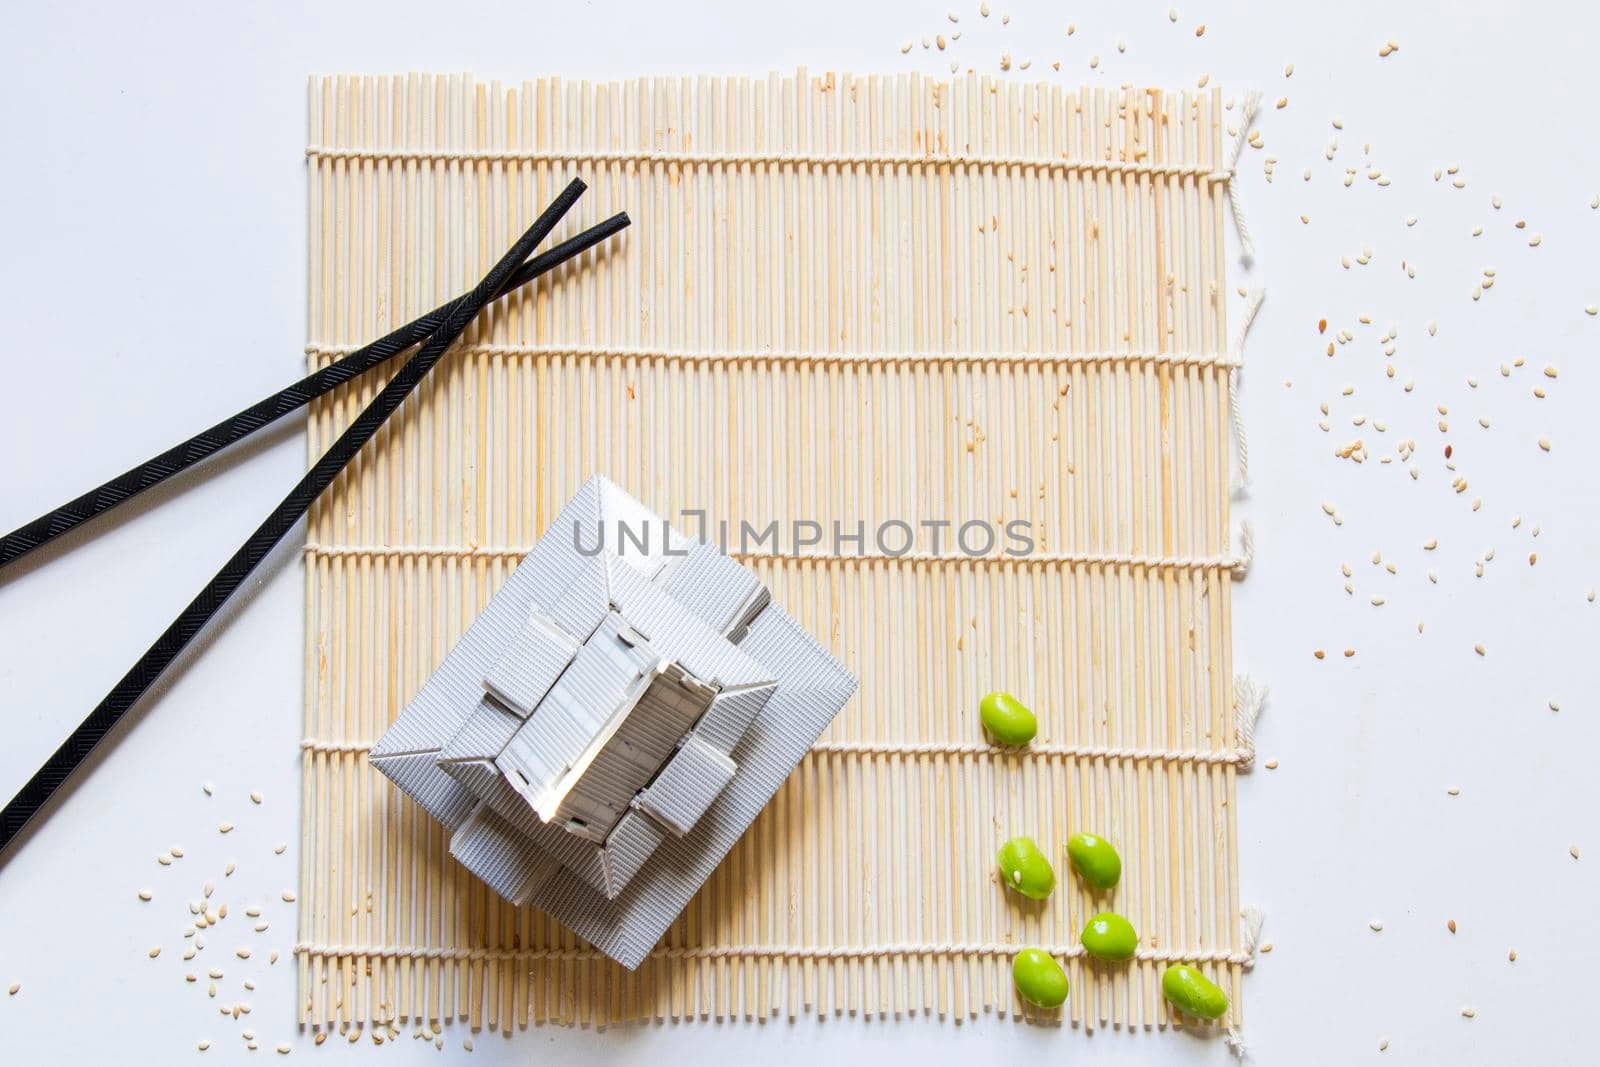 Asian food background, chopsticks, asian mini house and other objects